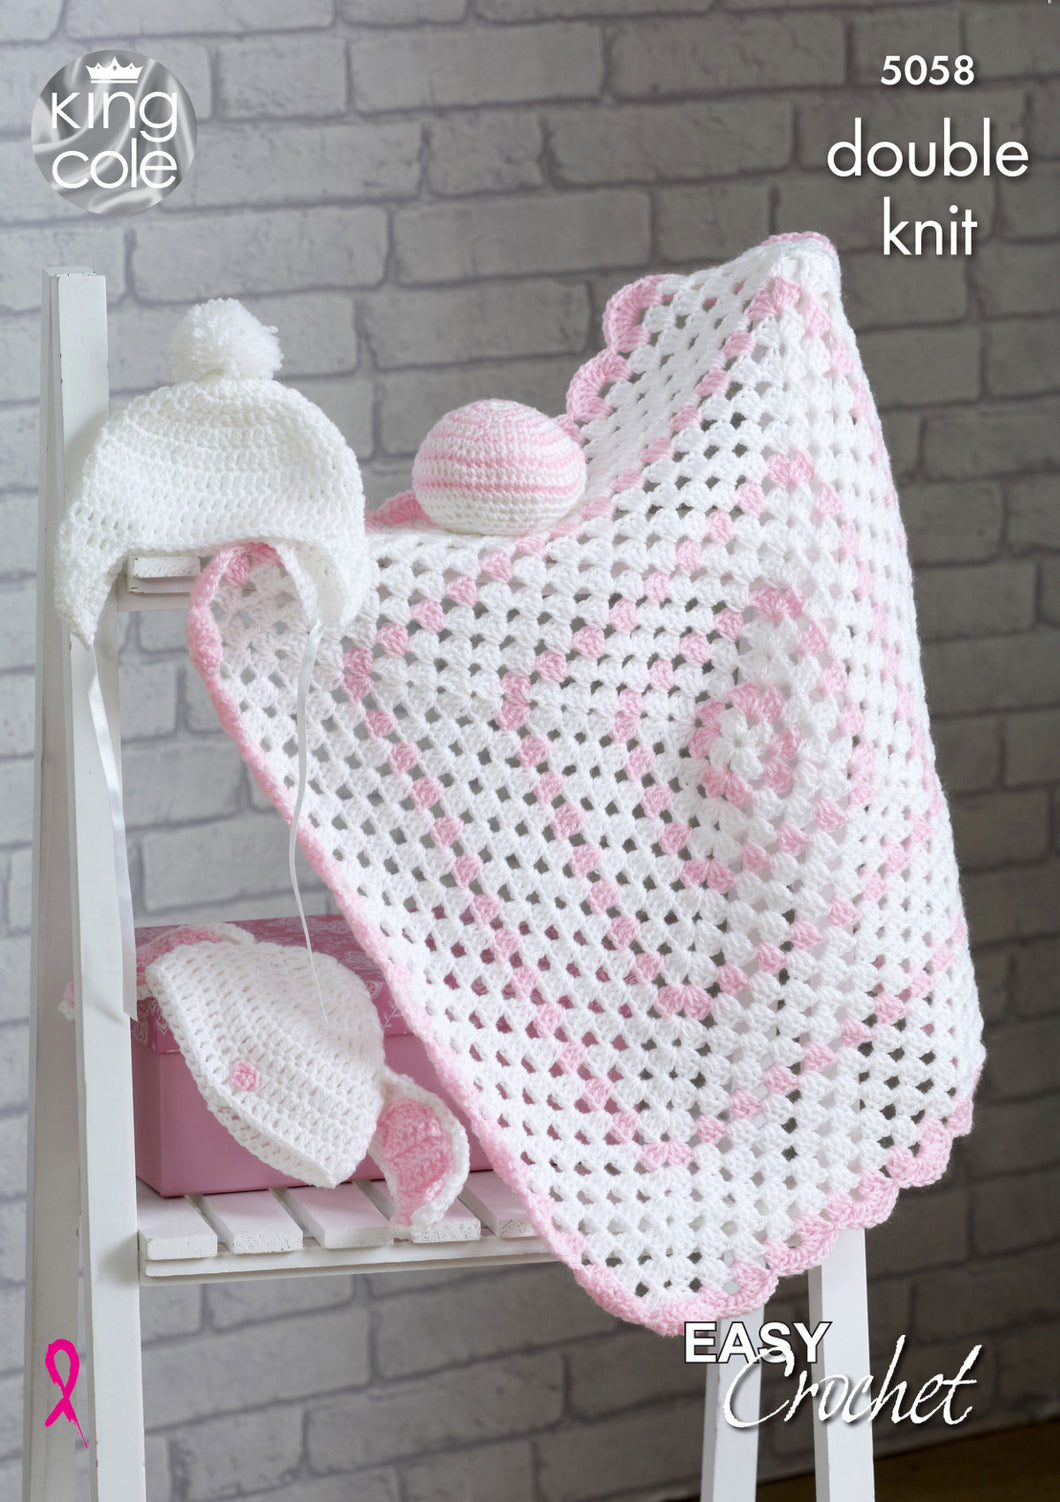 King Cole Step by Step Easy Crochet Pattern - Baby Blanket Hats & Ball (5058)